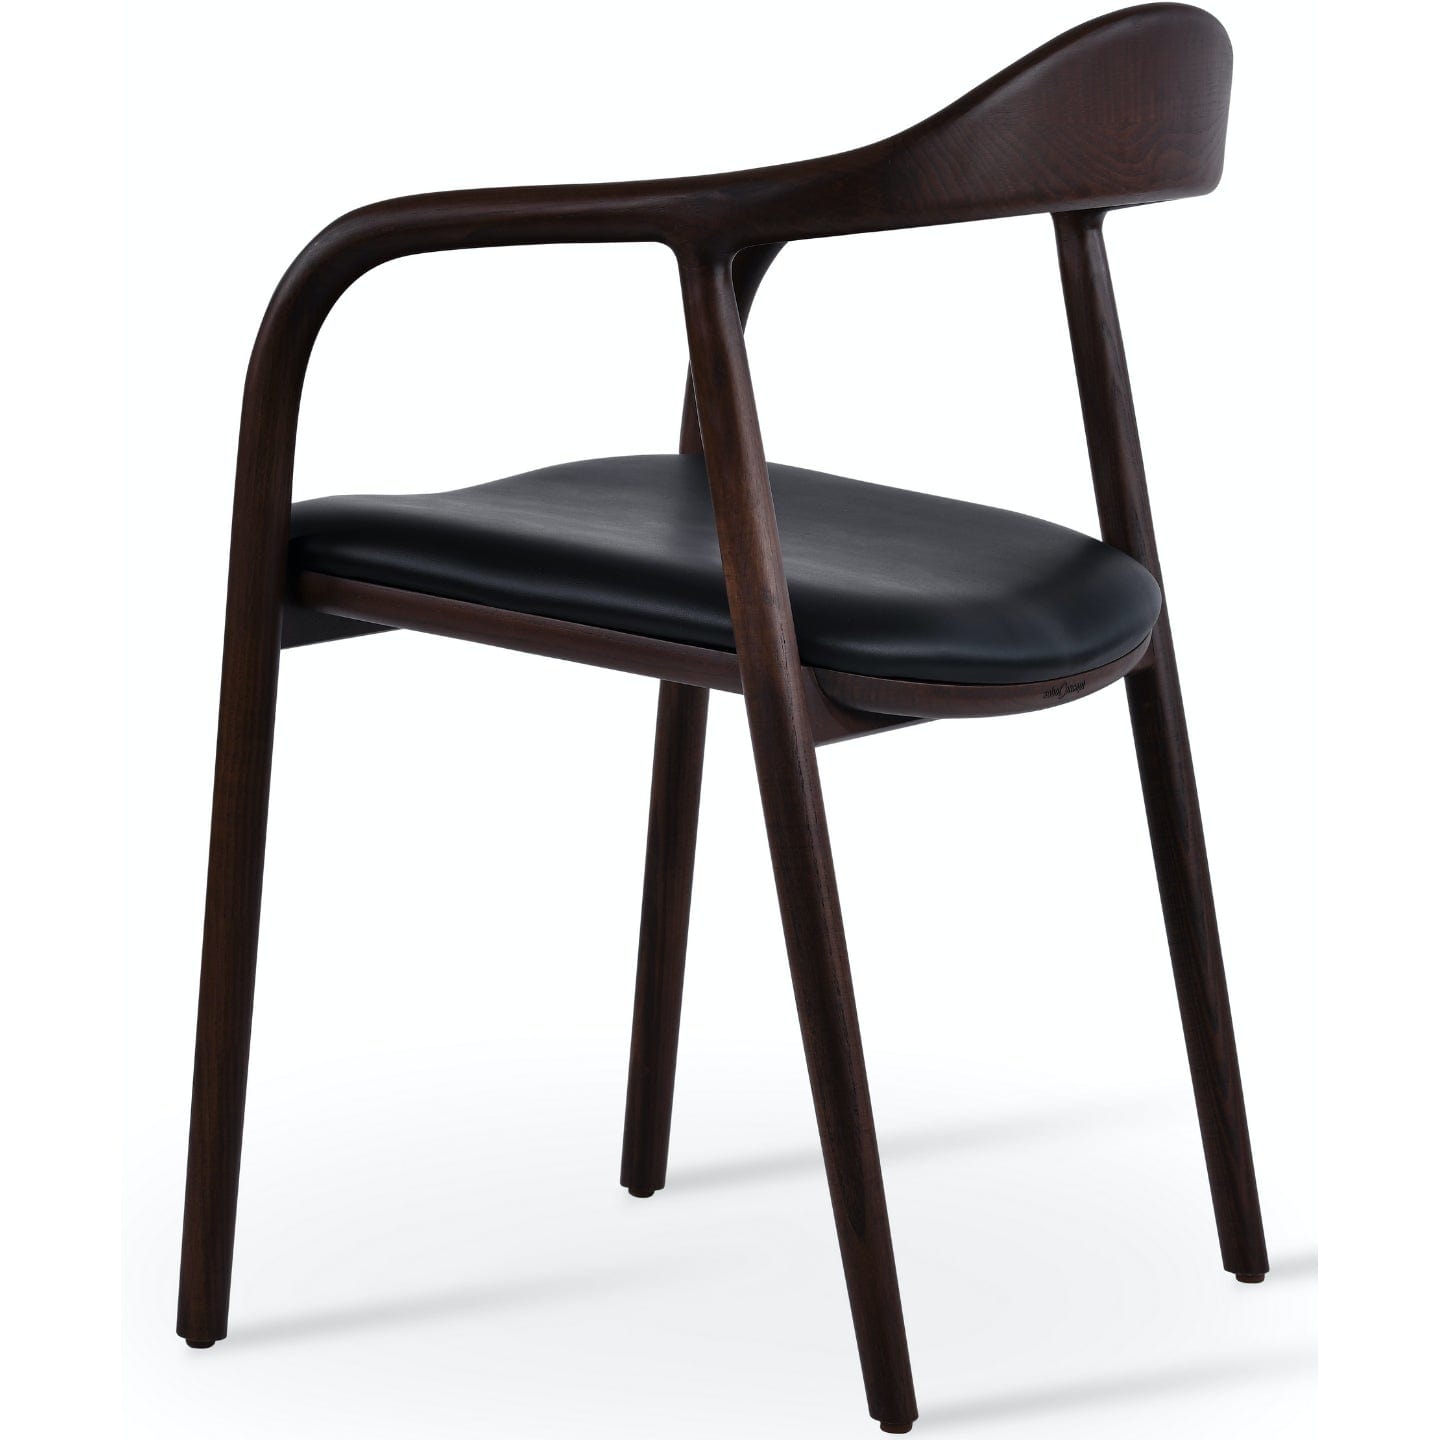 Soho Concept infinity-armchair-walnut-wood-base-faux-leather-seat-dining-chair-in-black